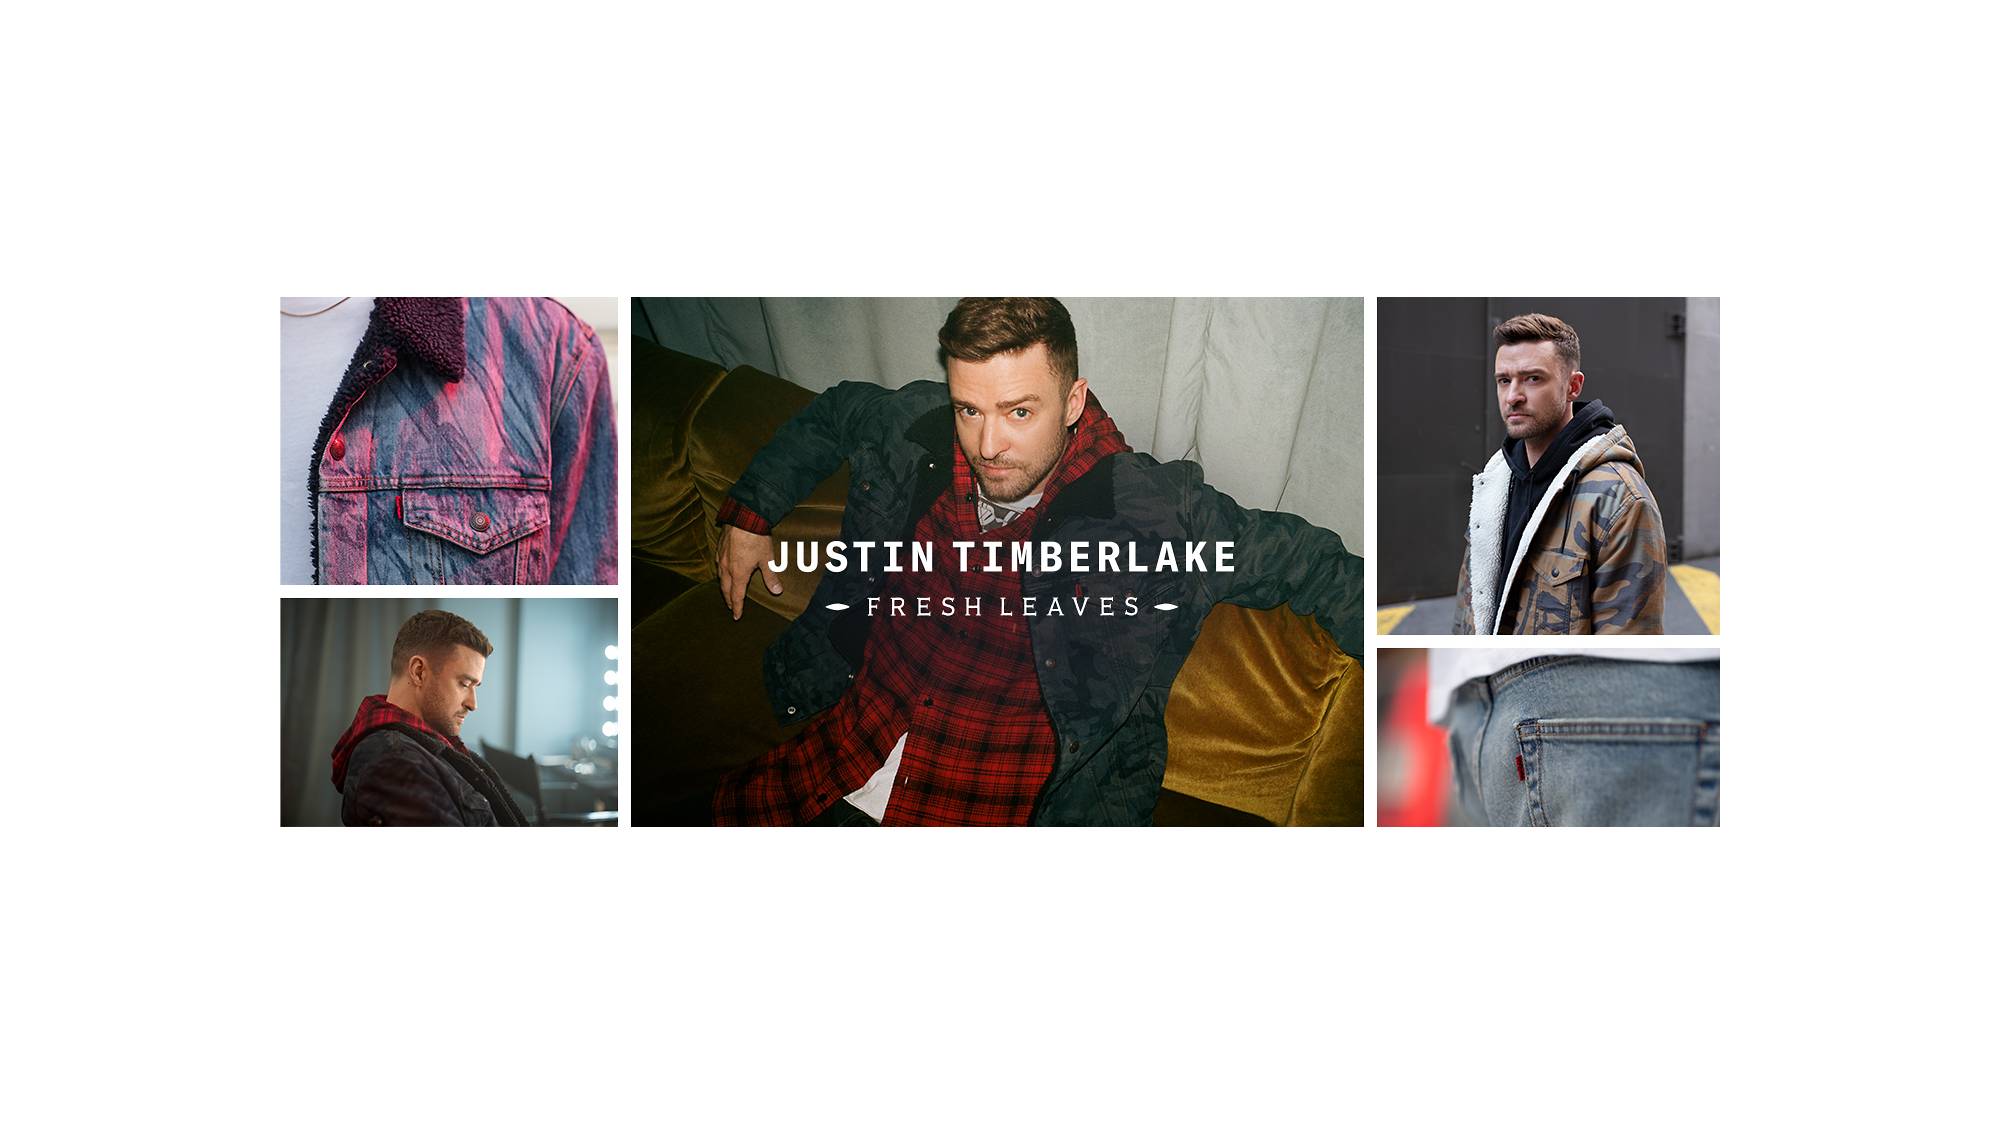 Justin Timberlake with clothing line